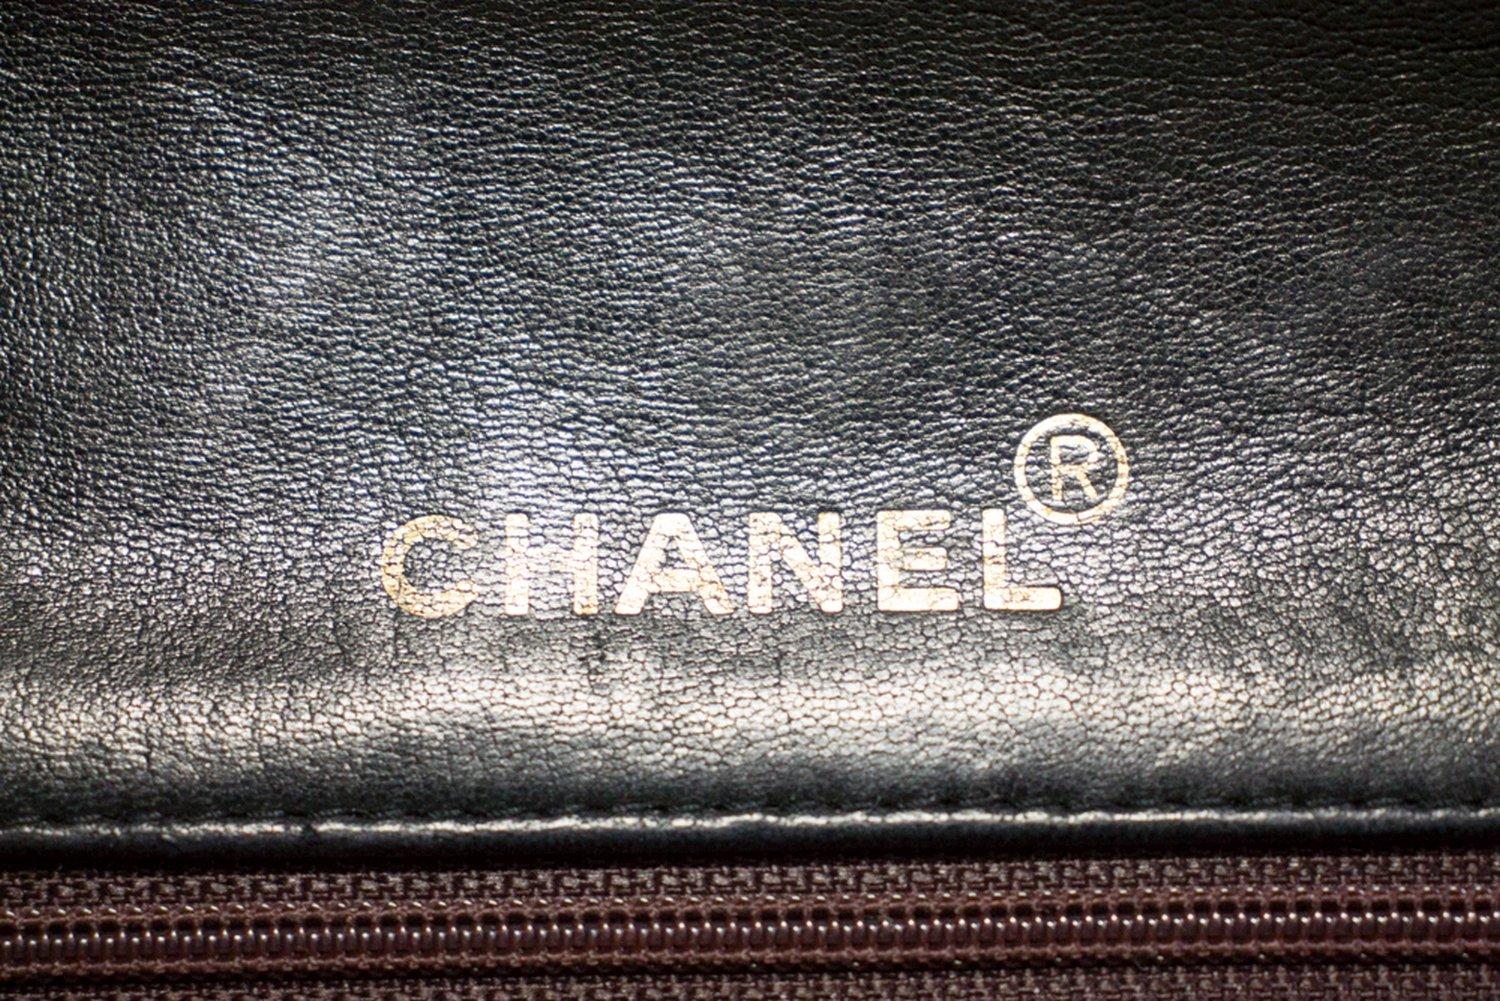 CHANEL Full Chain Flap Shoulder Bag Black Quilted Lambskin 11